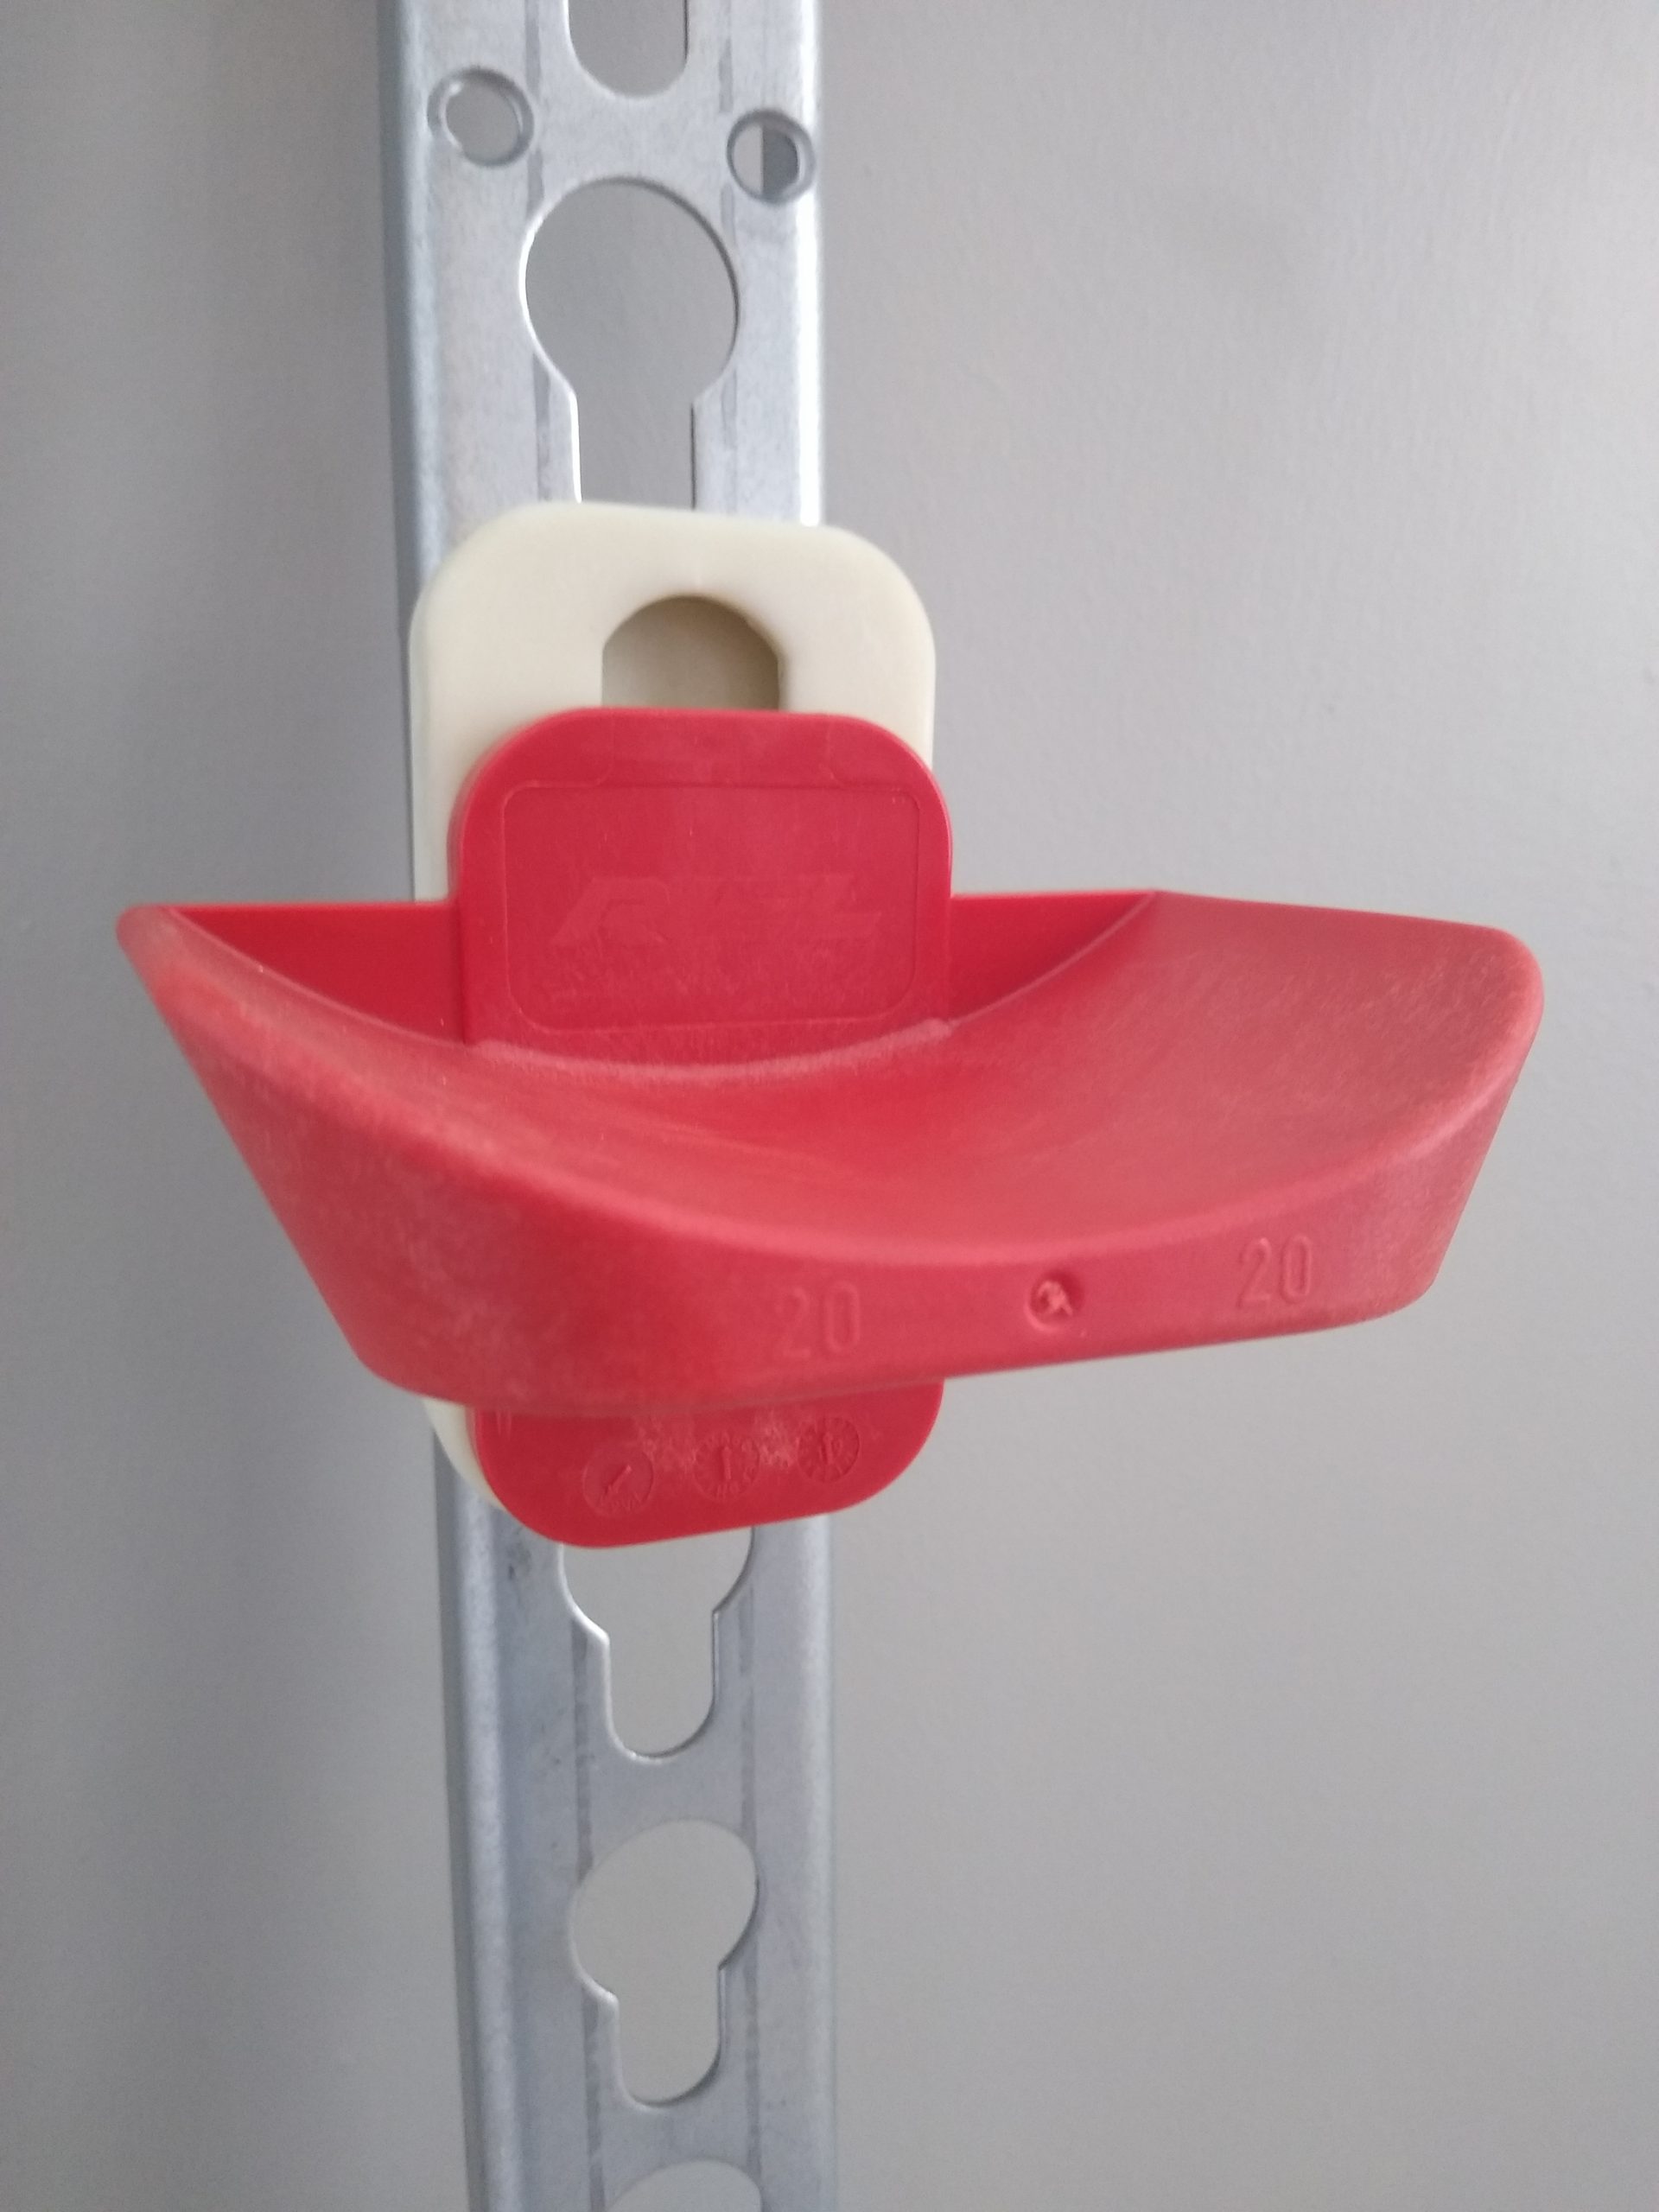 release adapters safety cups showjumping key hole tracking 